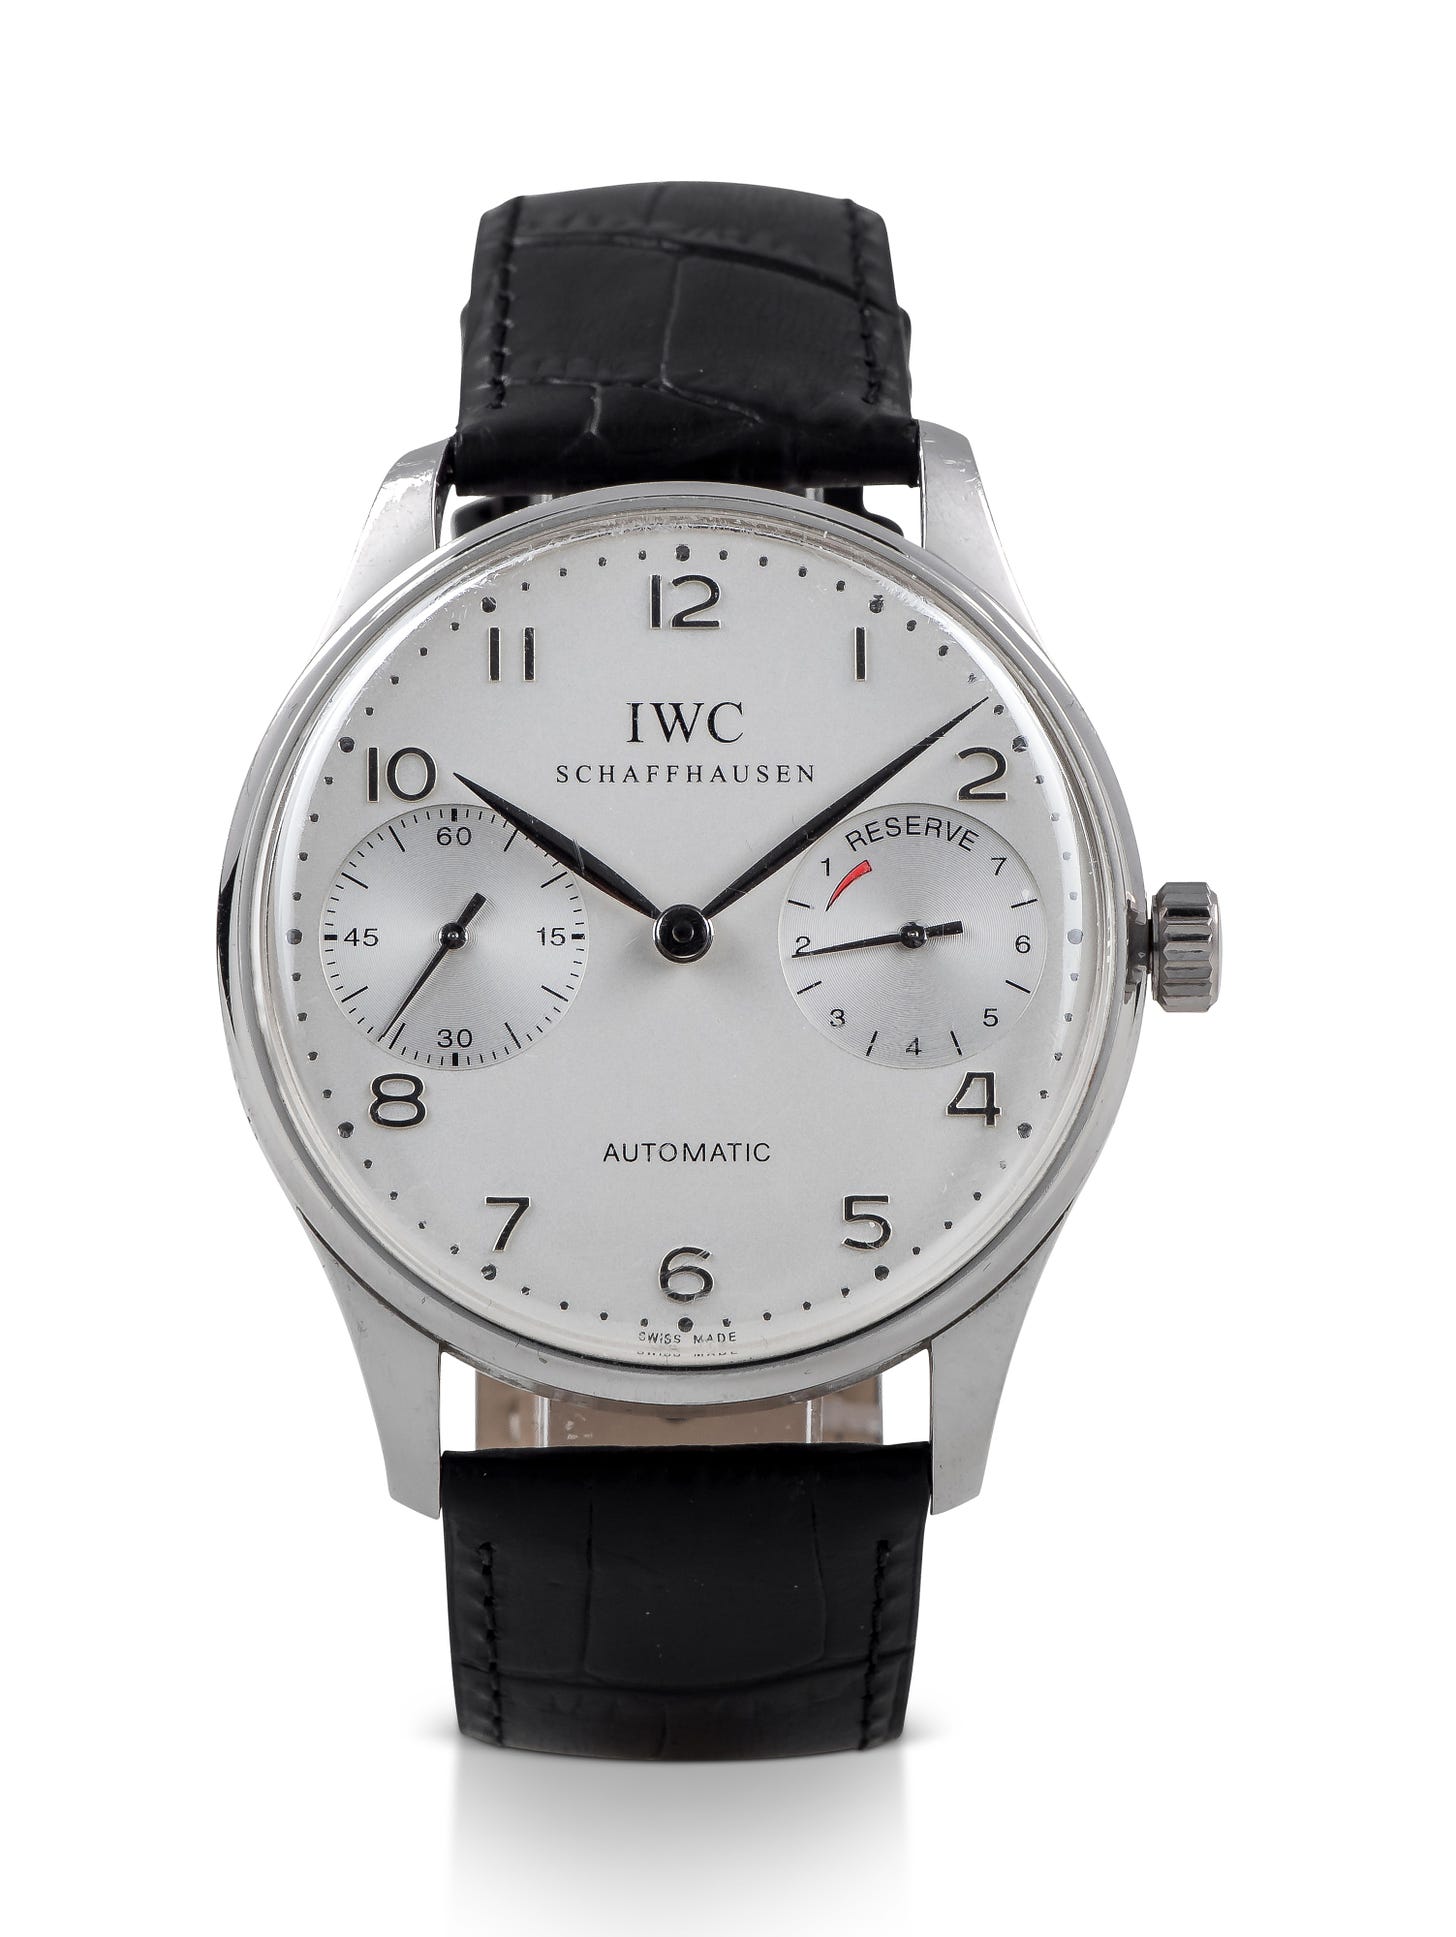 IWC | PORTUGIESER AUTOMATIK 2000, REF 5000 LIMITED EDITION PLATINUM  WRISTWATCH WITH POWER RESERVE INDICATION CIRCA 2000 | Watches Online |  Watches | Sotheby's